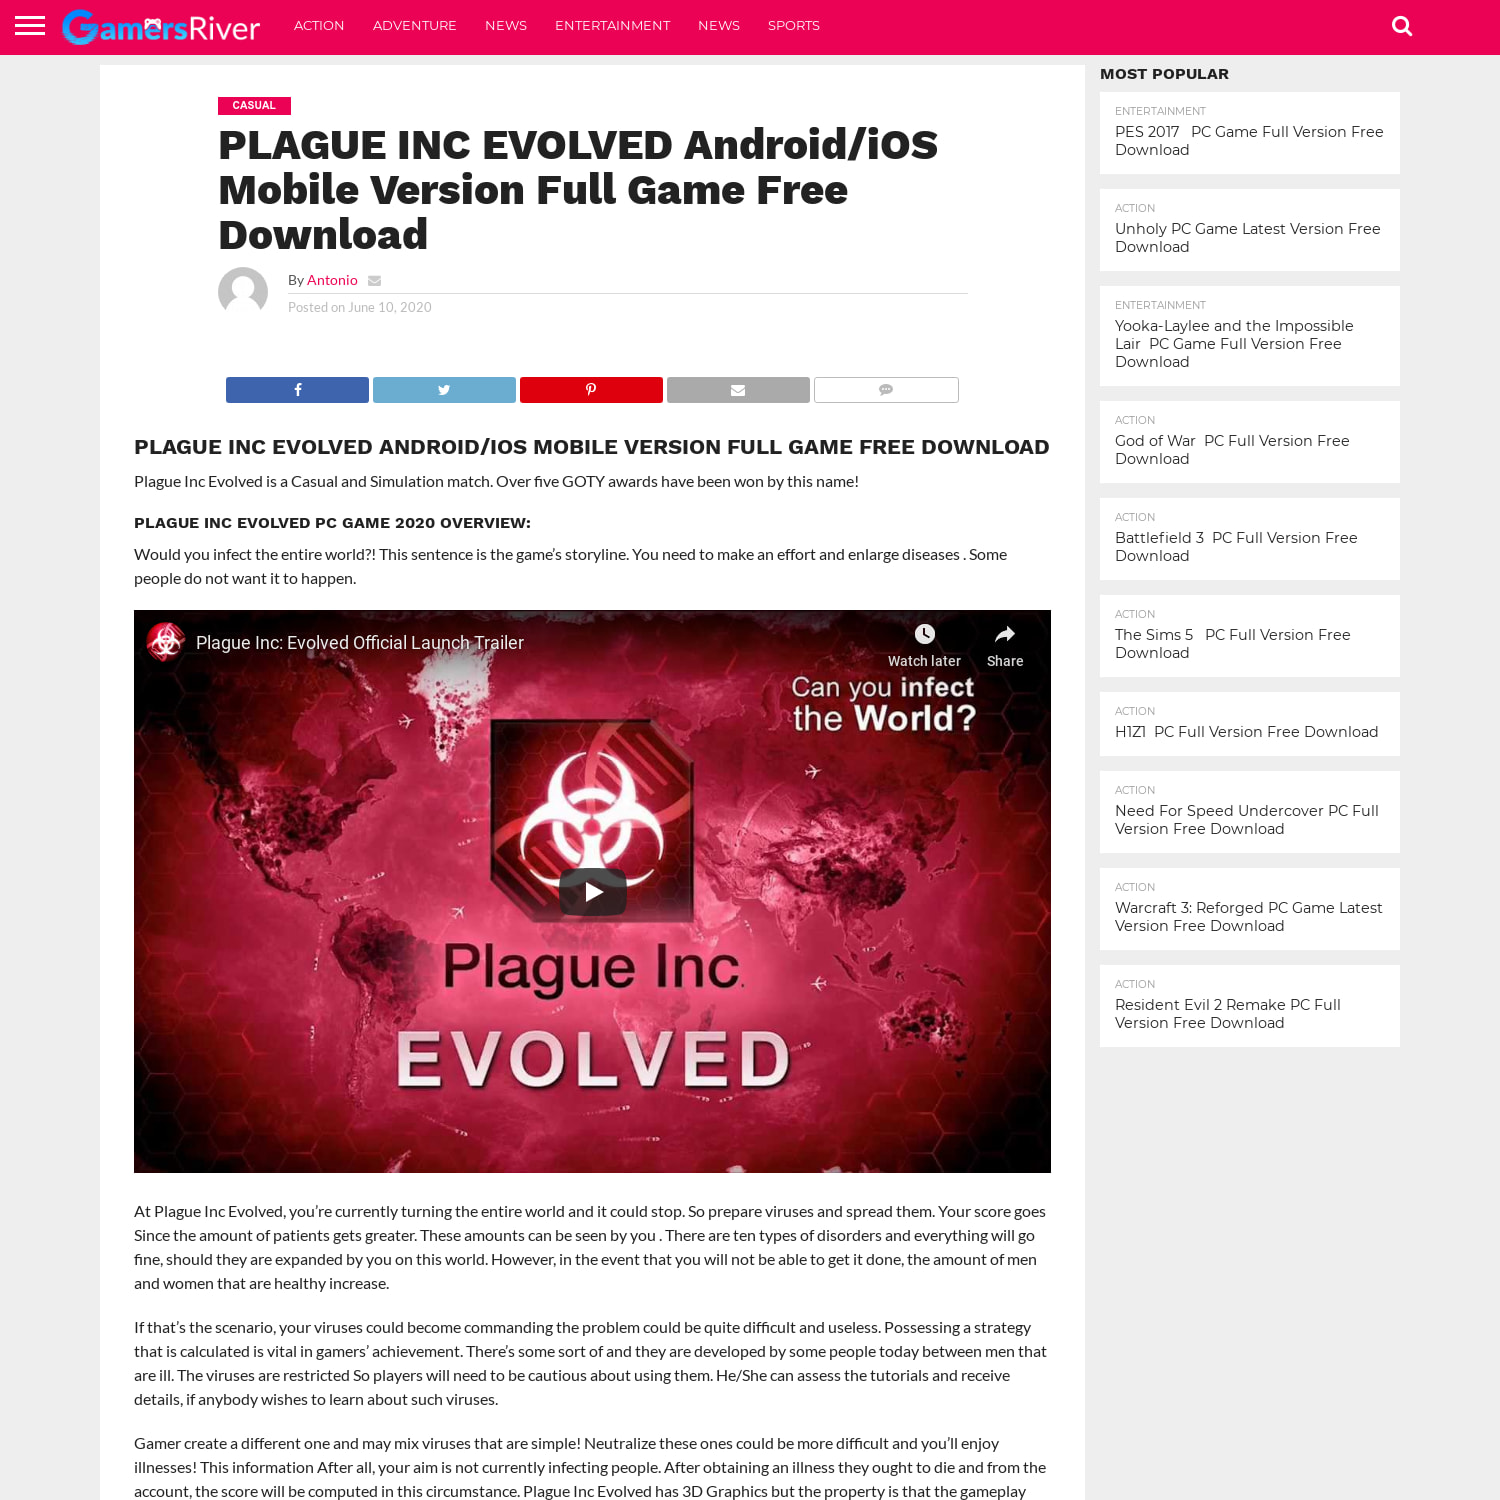 PLAGUE INC EVOLVED Android/iOS Mobile Version Full Game Free Download